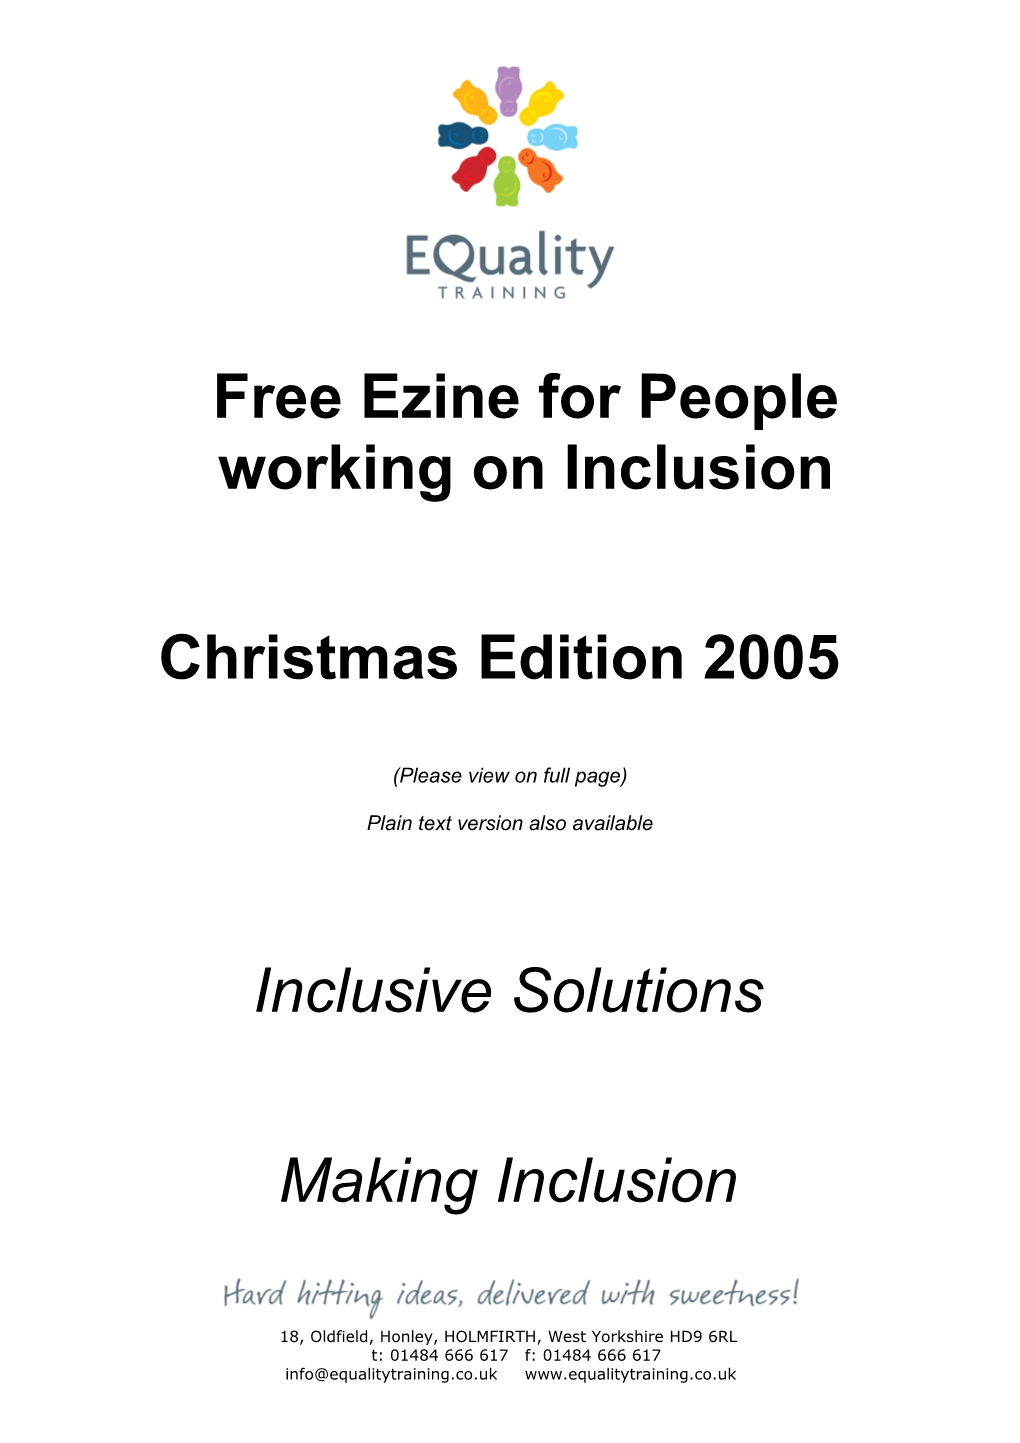 Free Ezine for People Working on Inclusion